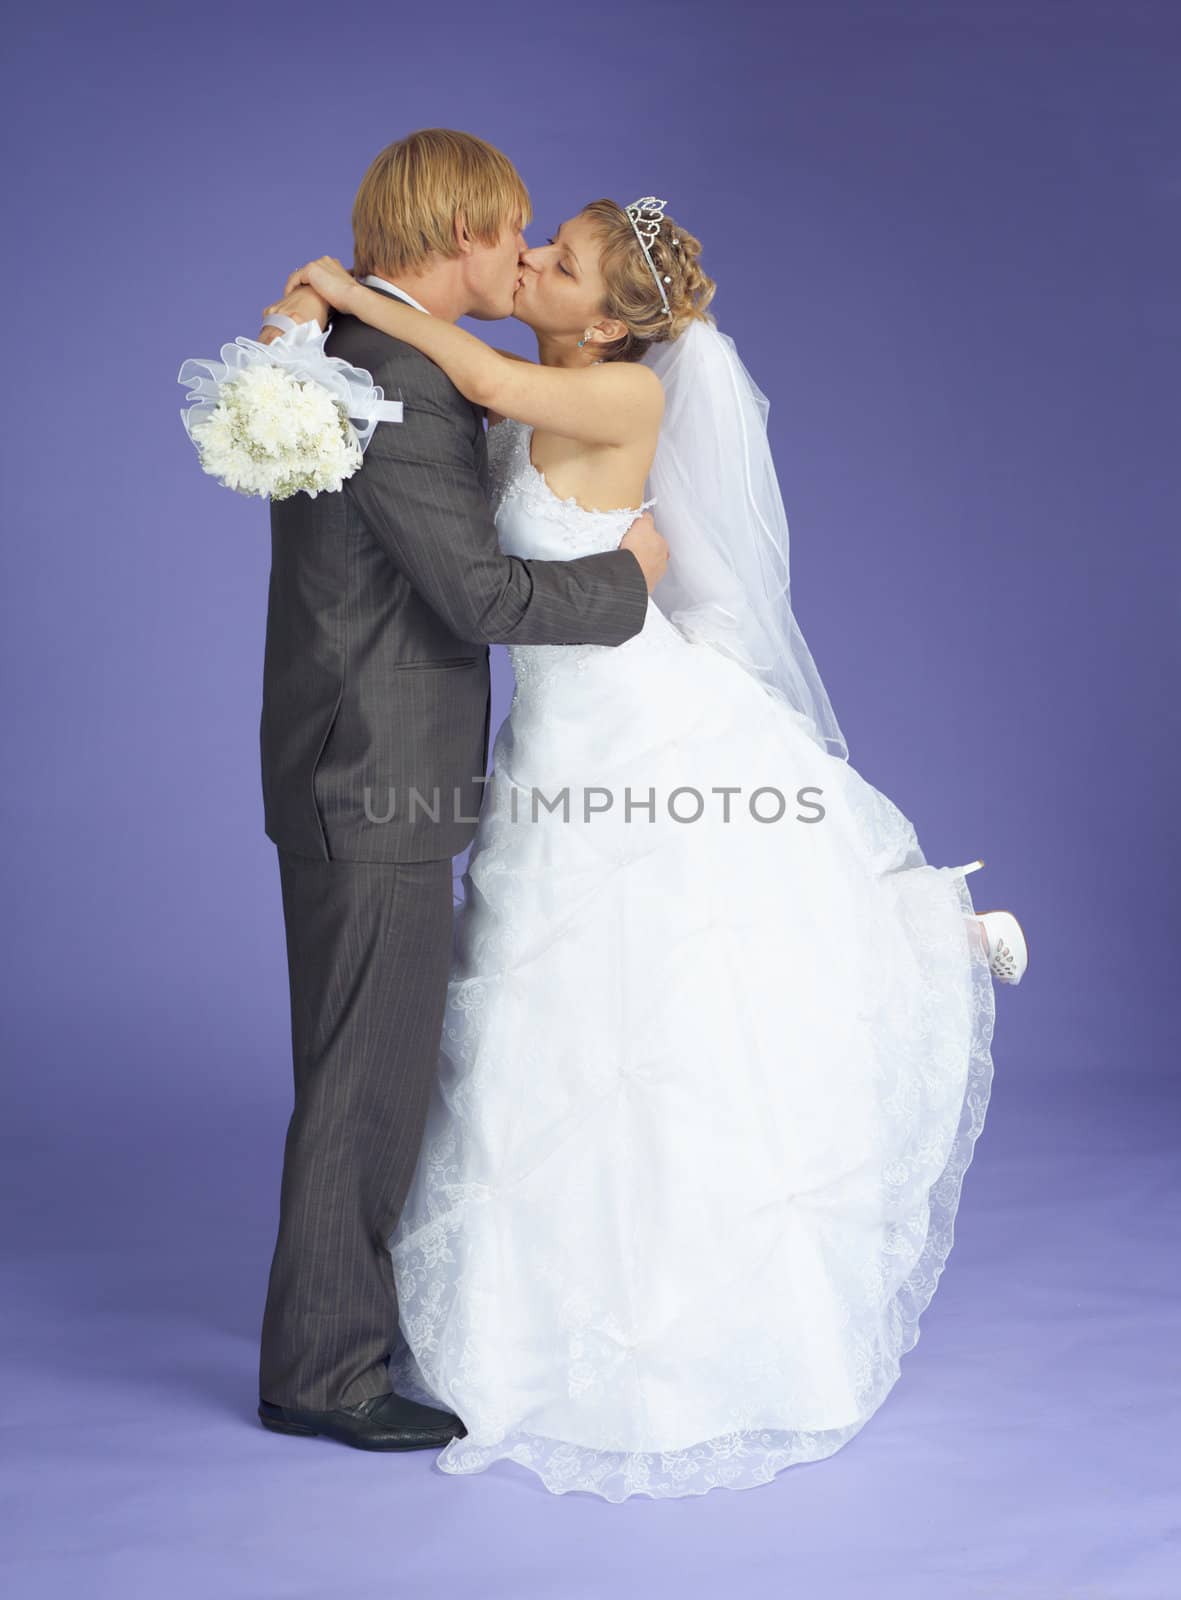 Newly-married couple kisses standing on a violet background